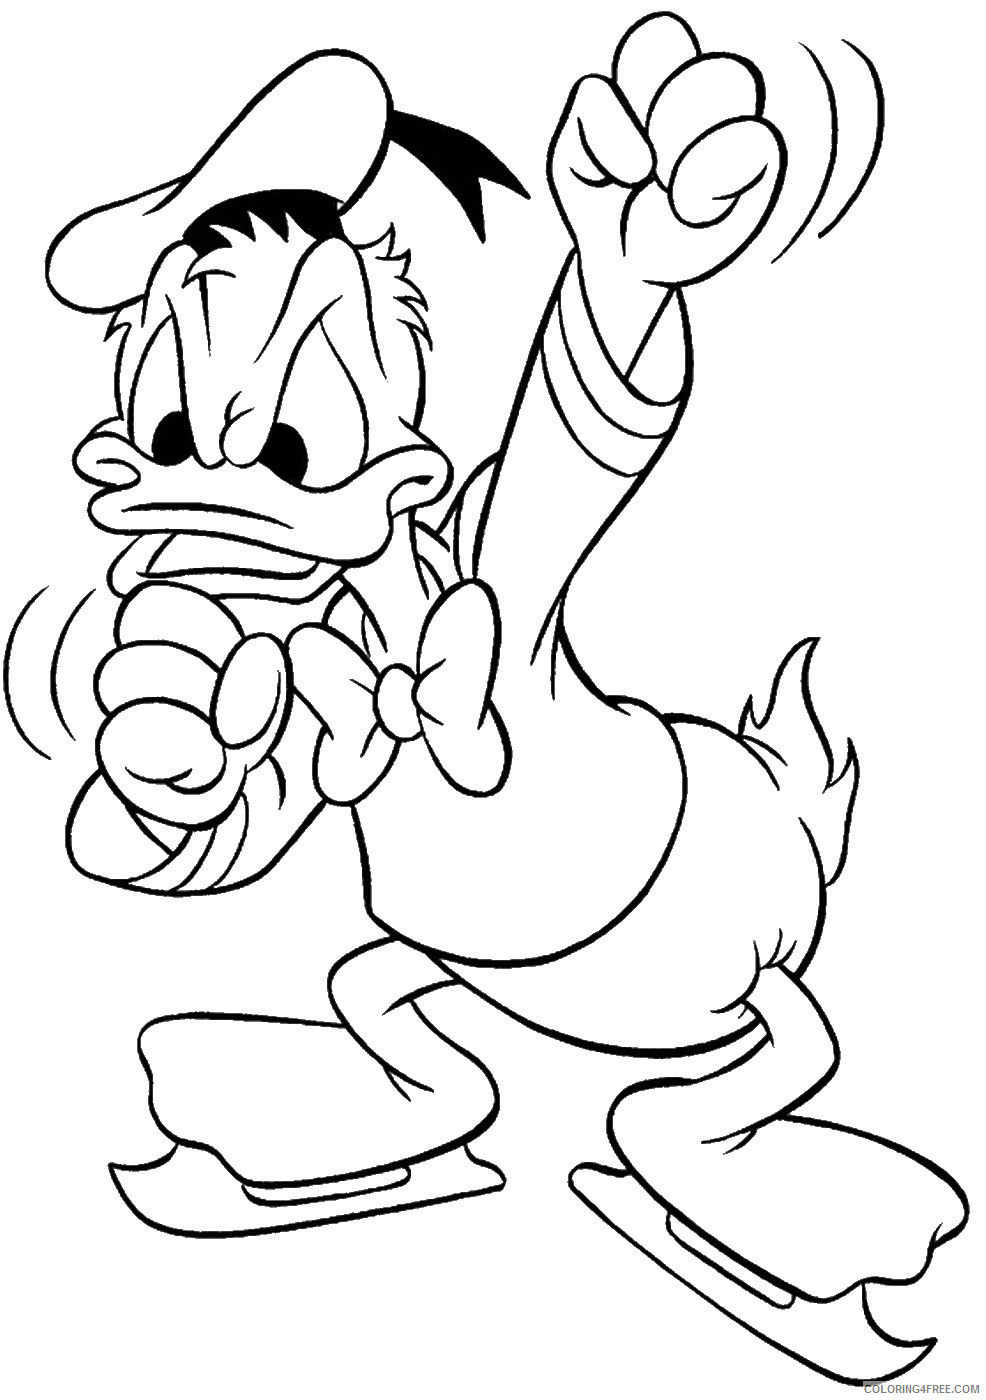 Donald Duck Coloring Pages Cartoons donald_39 Printable 2020 2522 Coloring4free